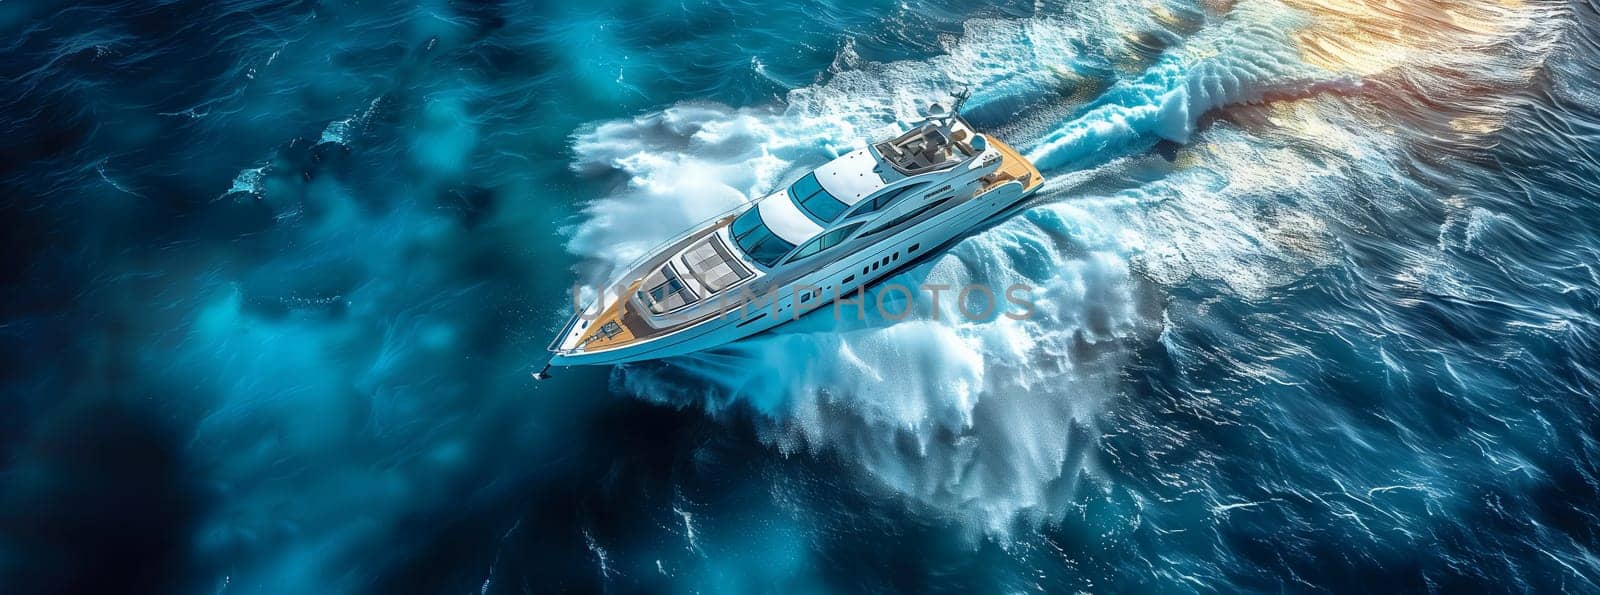 A watercraft is gliding on the expansive liquid surface of a natural landscape, showcasing the principles of naval architecture and marine biology